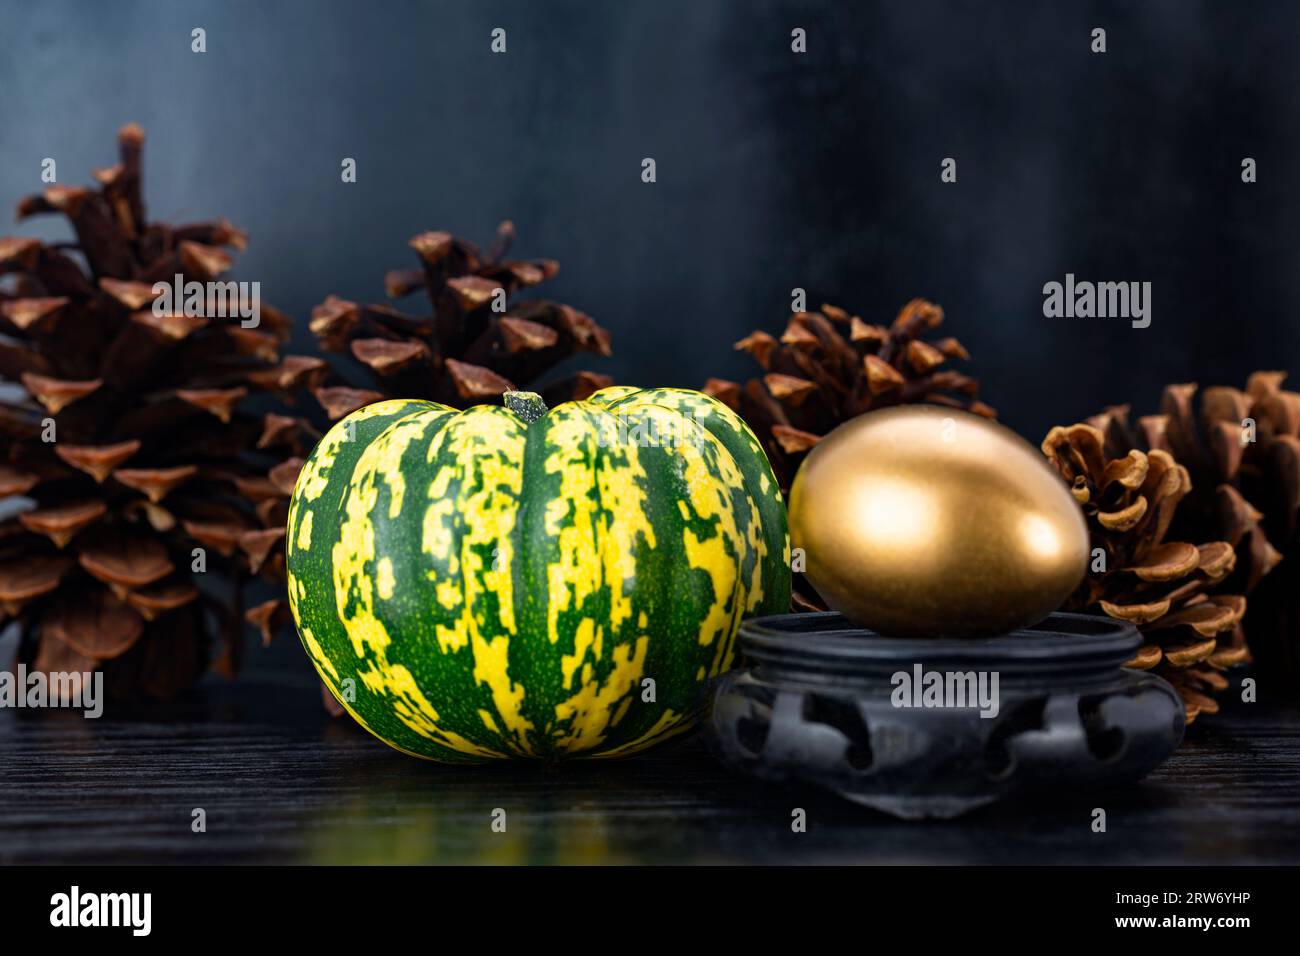 Conceptual finance image reflects autumn investments continuing successfully through metaphors of gold egg and autumn squash and pine cones in horizon Stock Photo